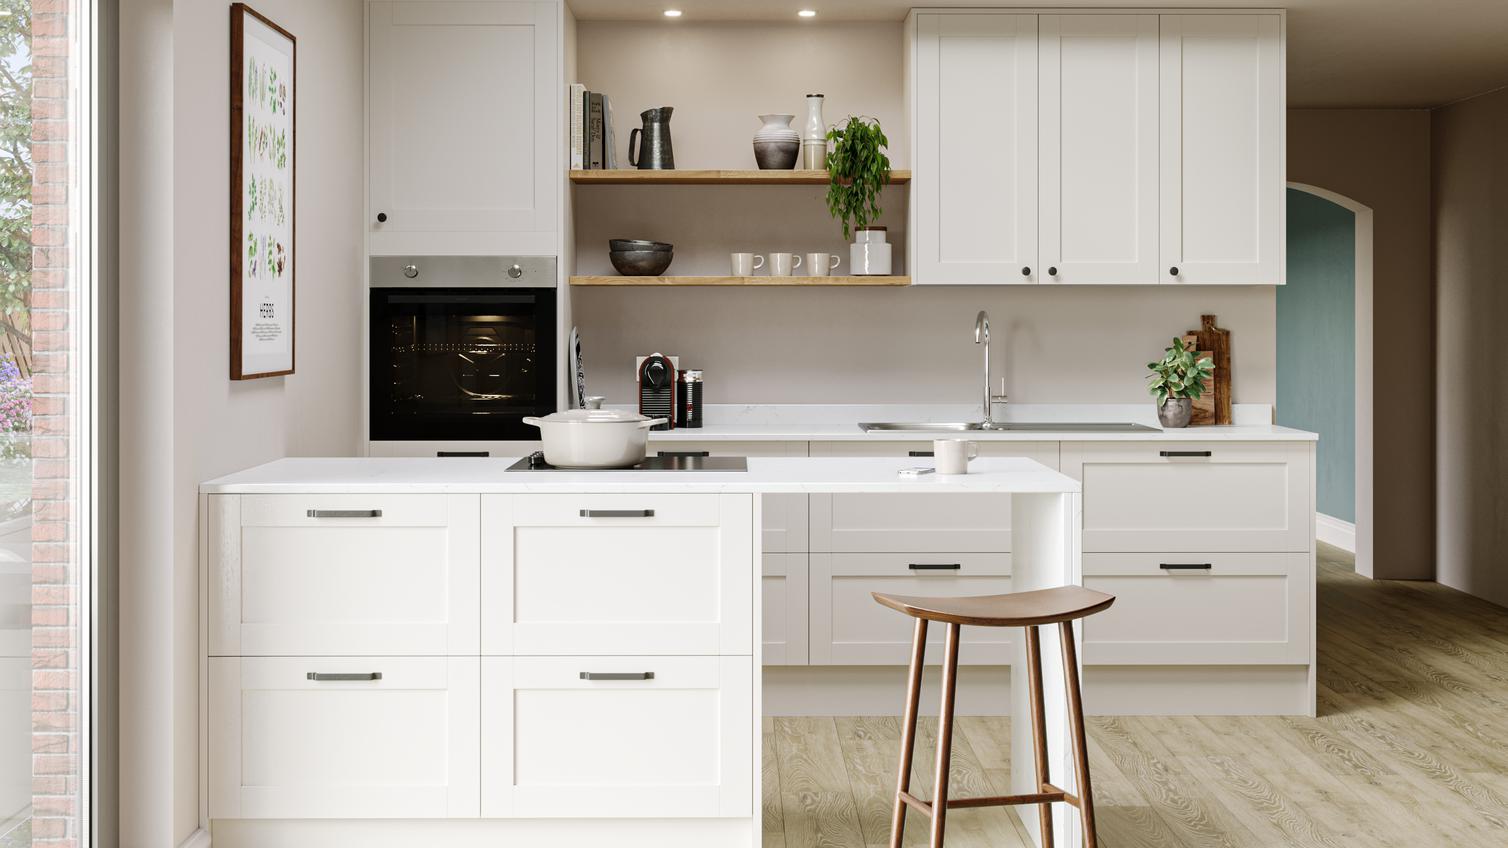 Subtle cream kitchen idea using antique white shaker doors and white worktops. Has a peninsular layout and a breakfast bar.